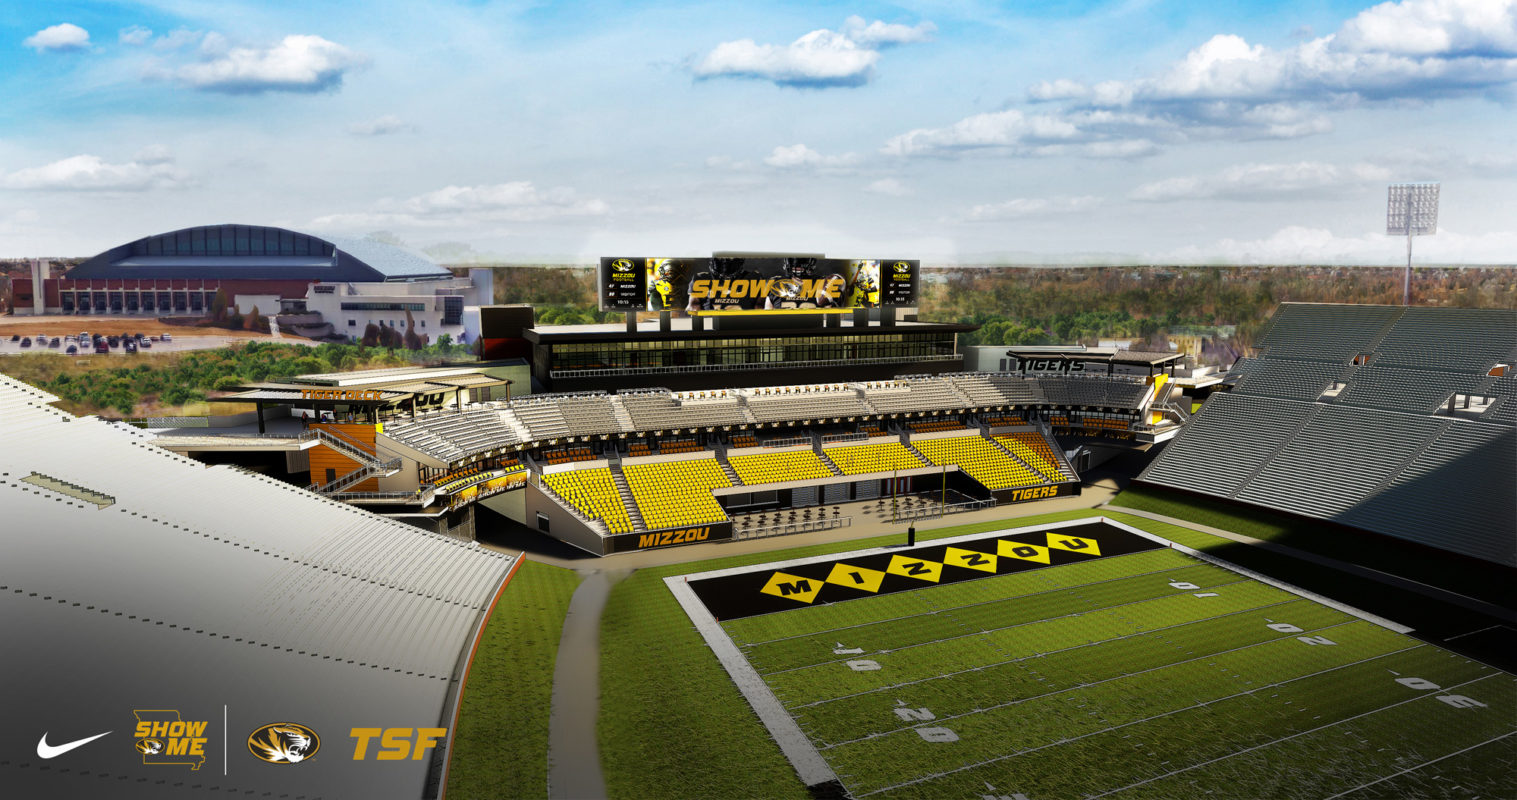 Mizzou Could Get Boost From Faurot Field at Memorial Stadium Renovation